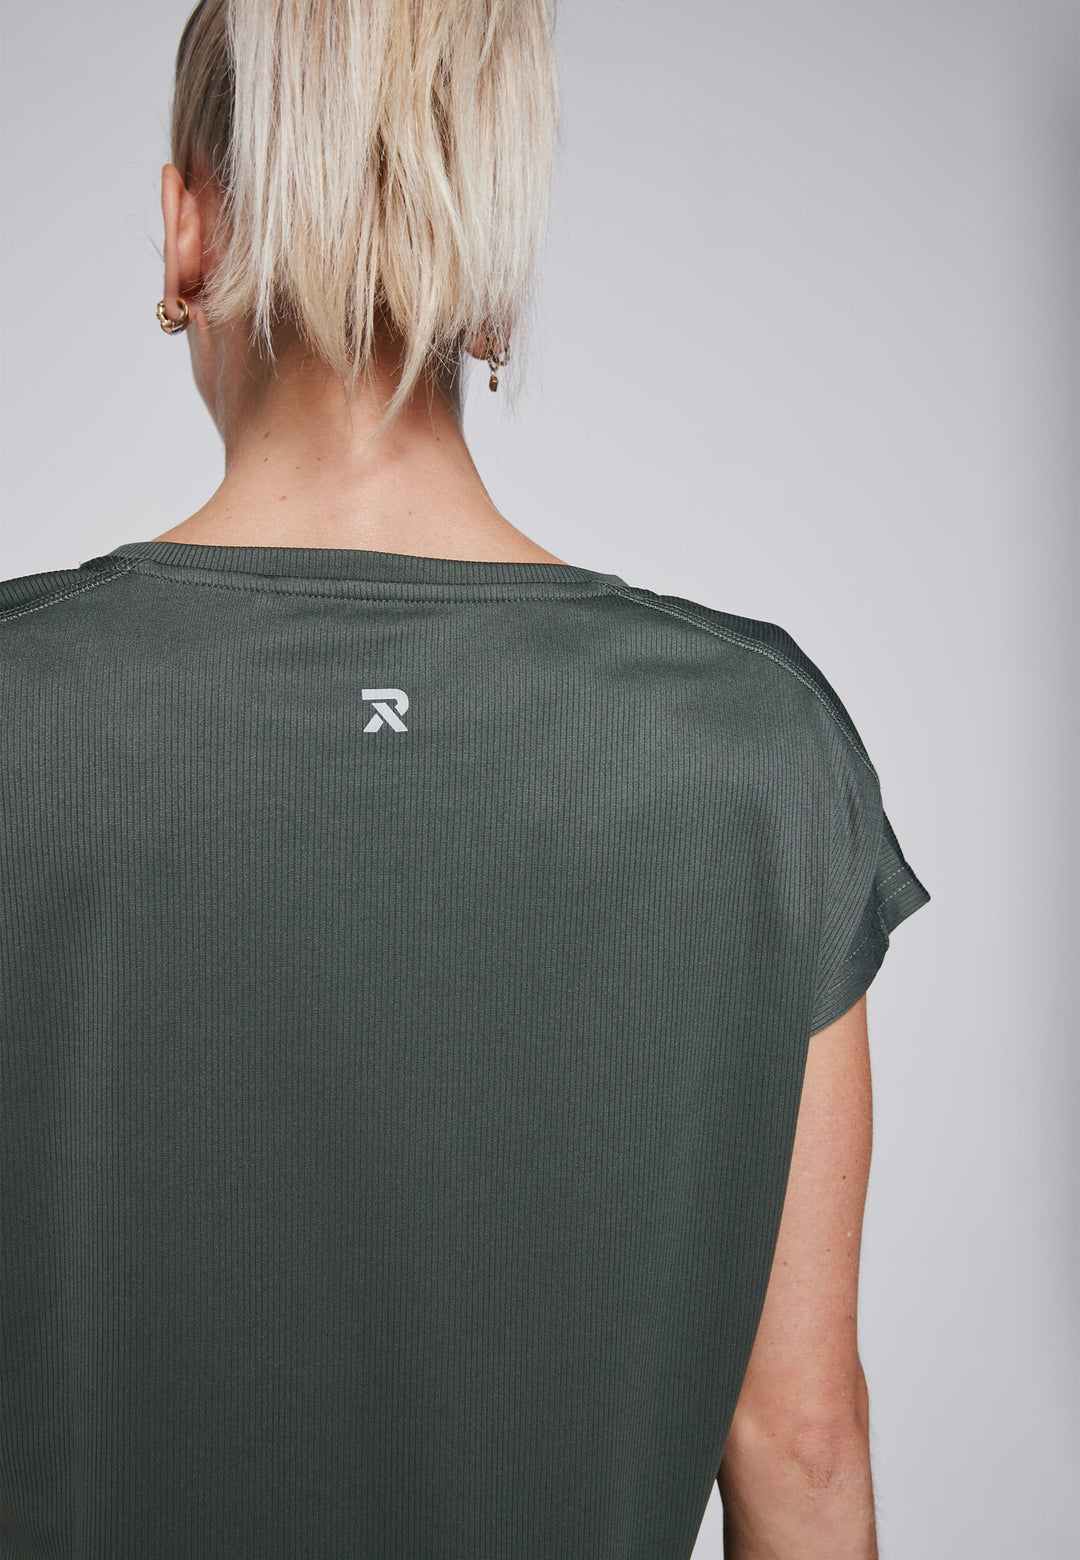 Women's sports top Dry-Cool - sustainable